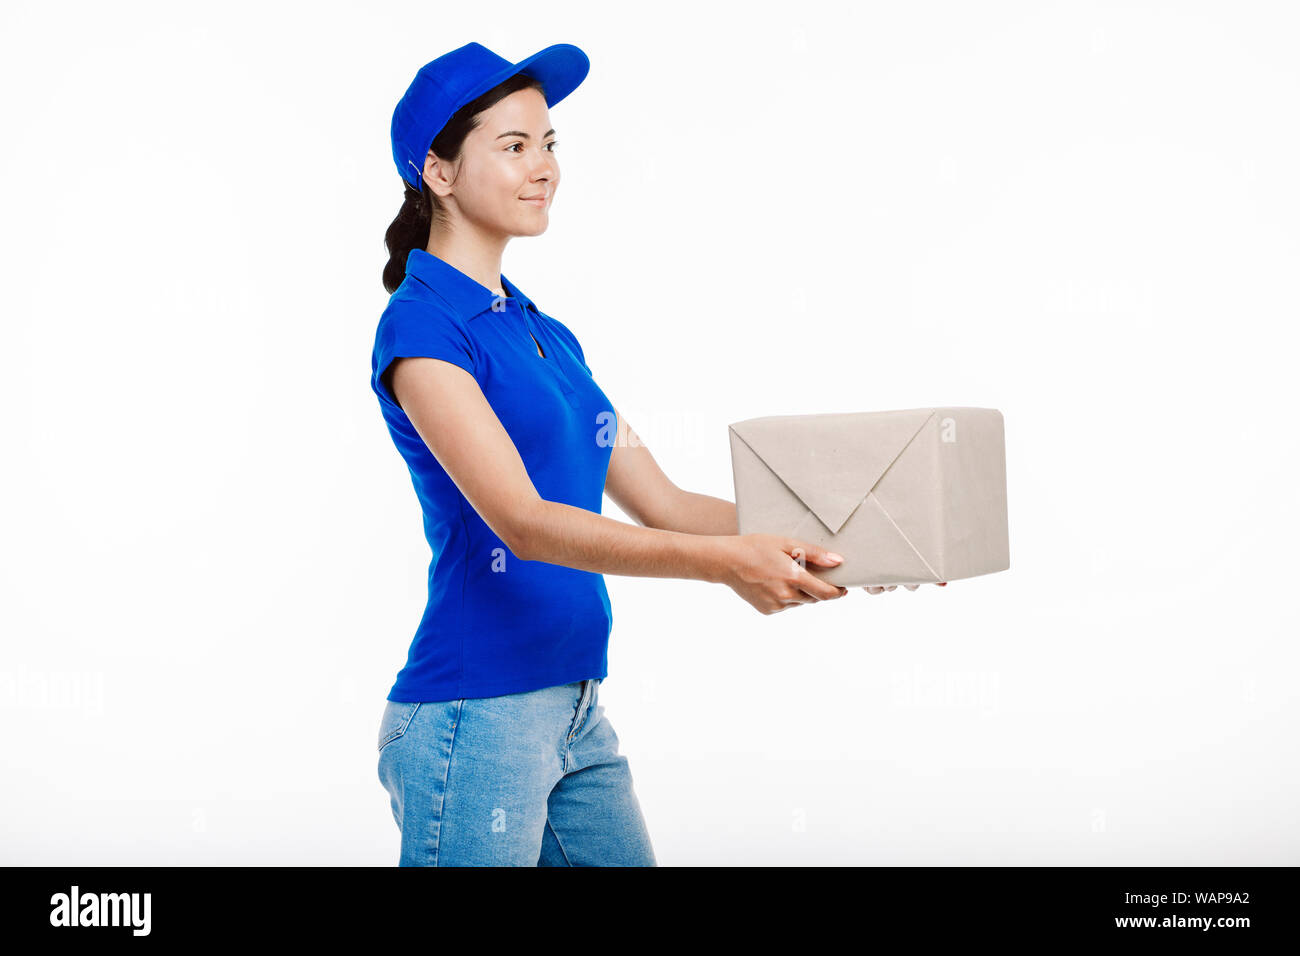 Deliery girl pictured while she gives the delivery to the client. She wears all blue uniform and smiles at someone. Stock Photo